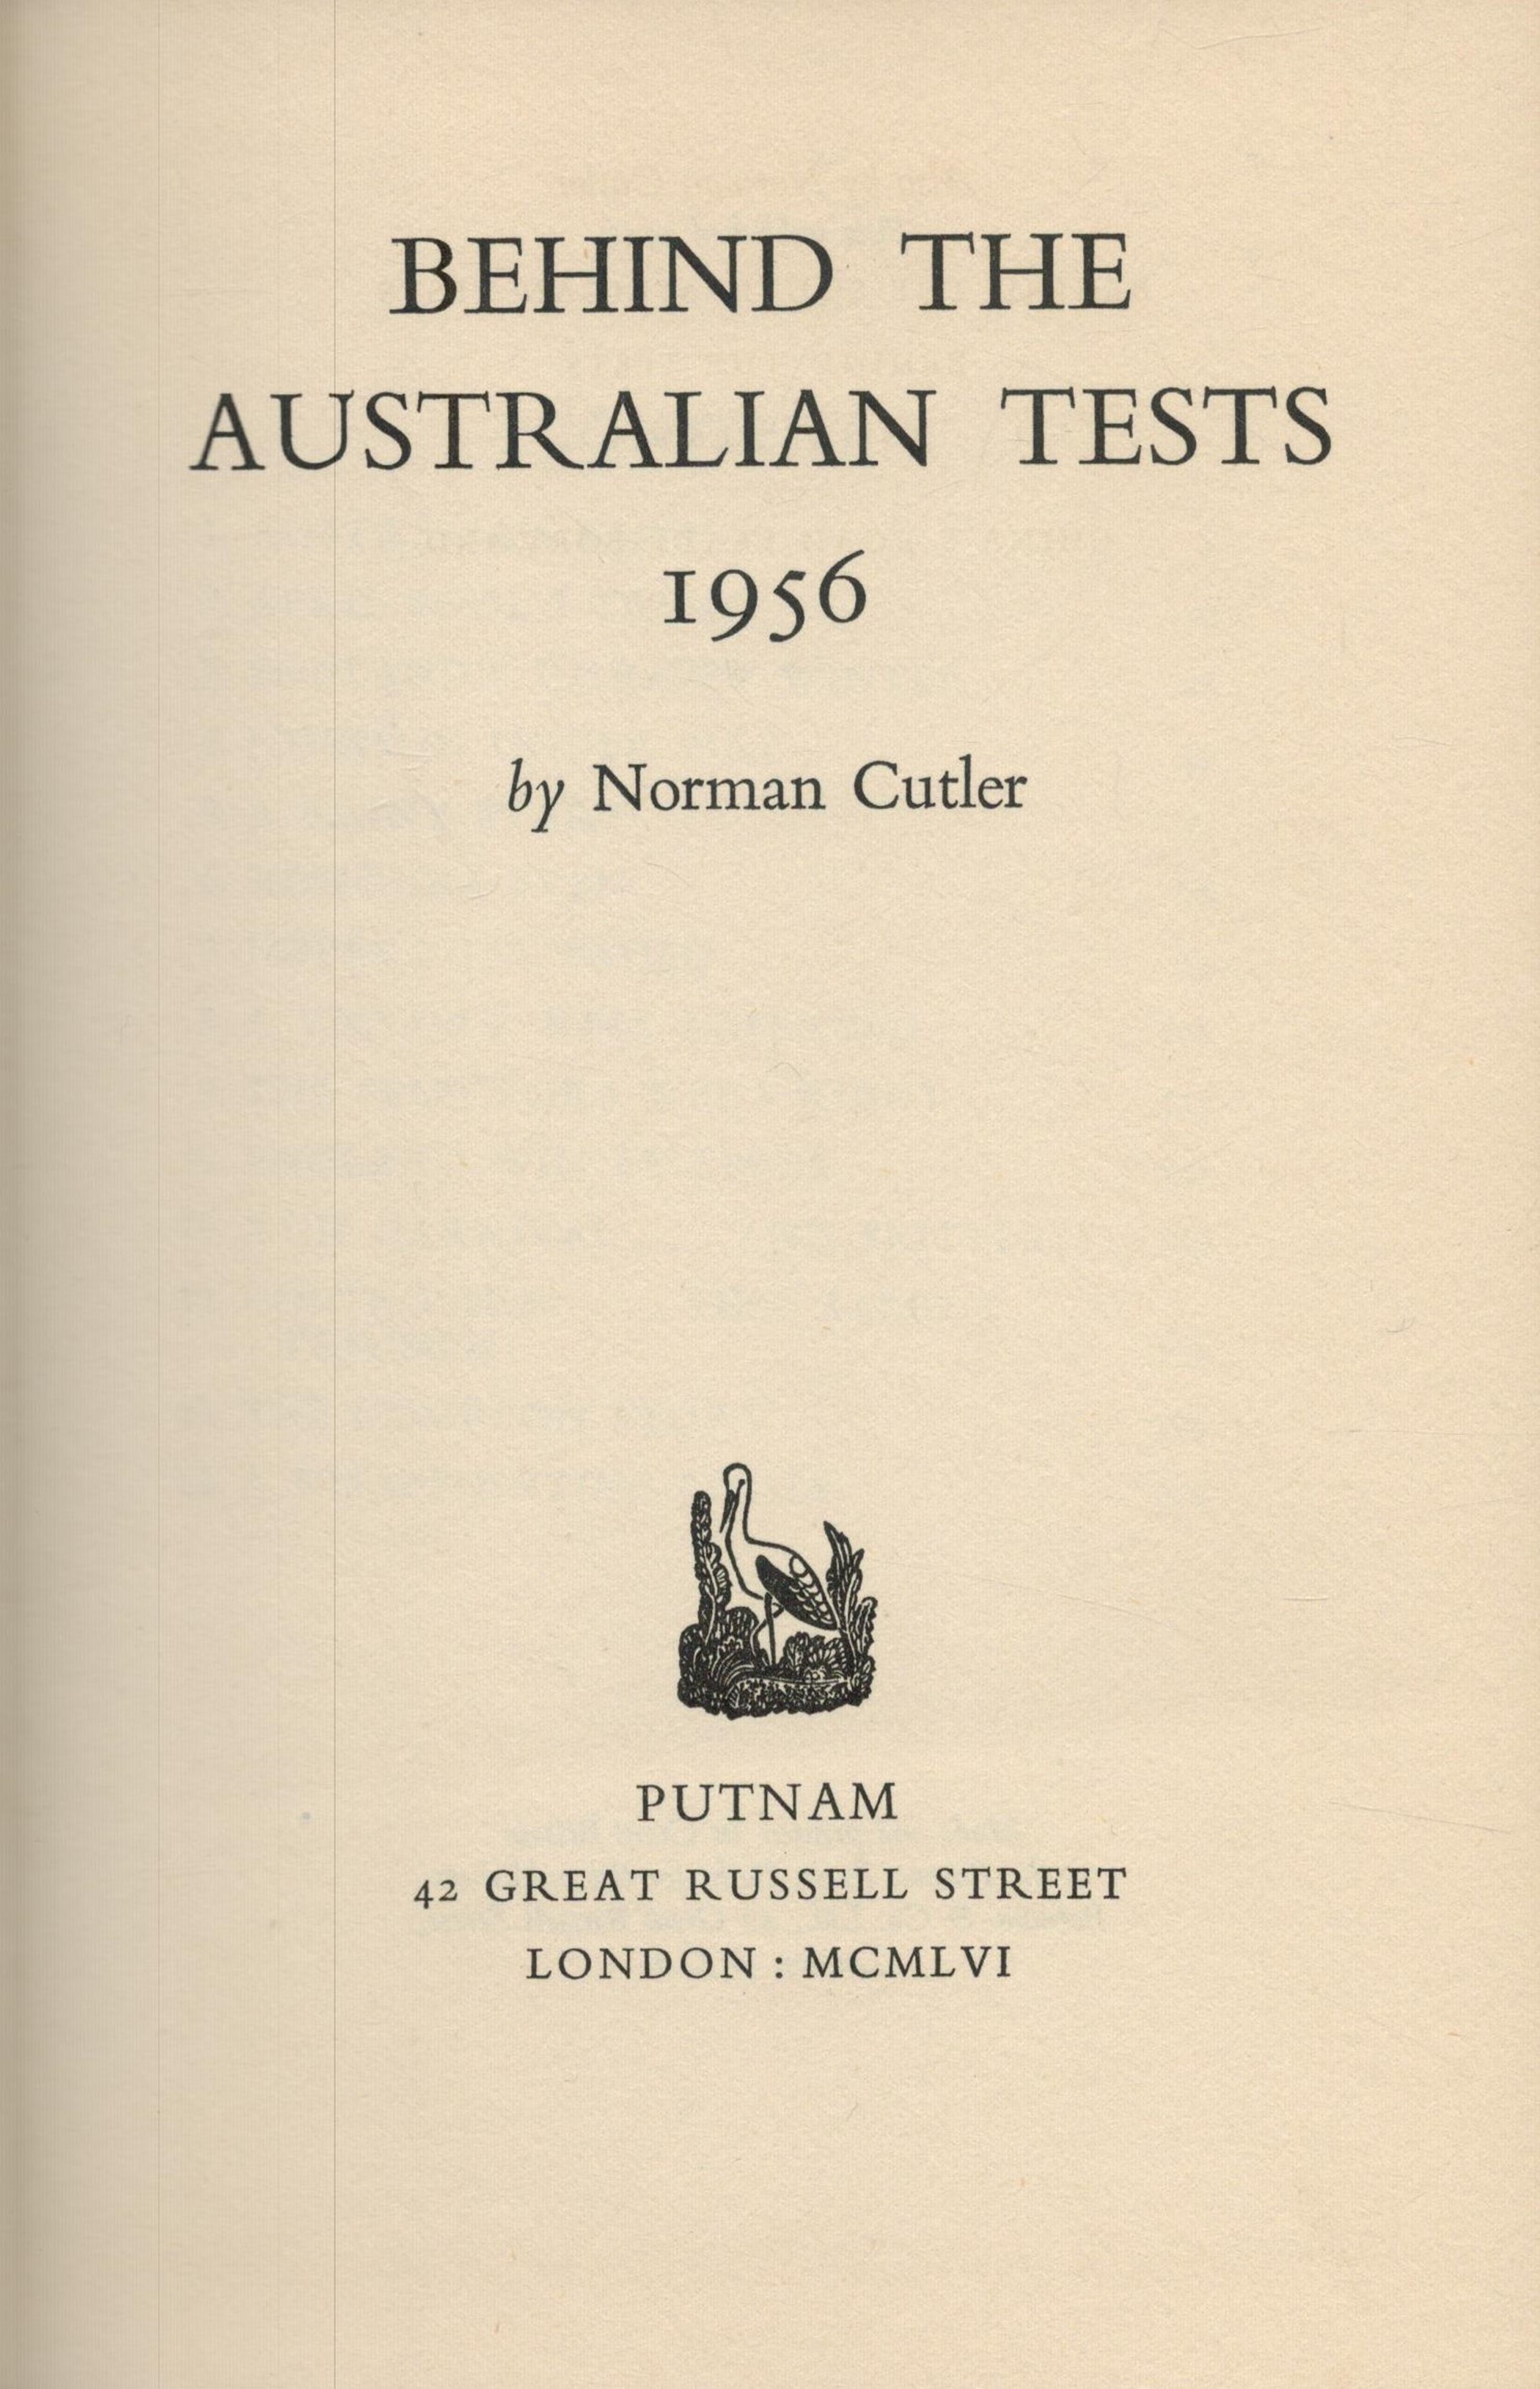 Behind the Australian tests 1956 by Norman Cutler hardback book. Some damage to dustjacket. - Image 2 of 3